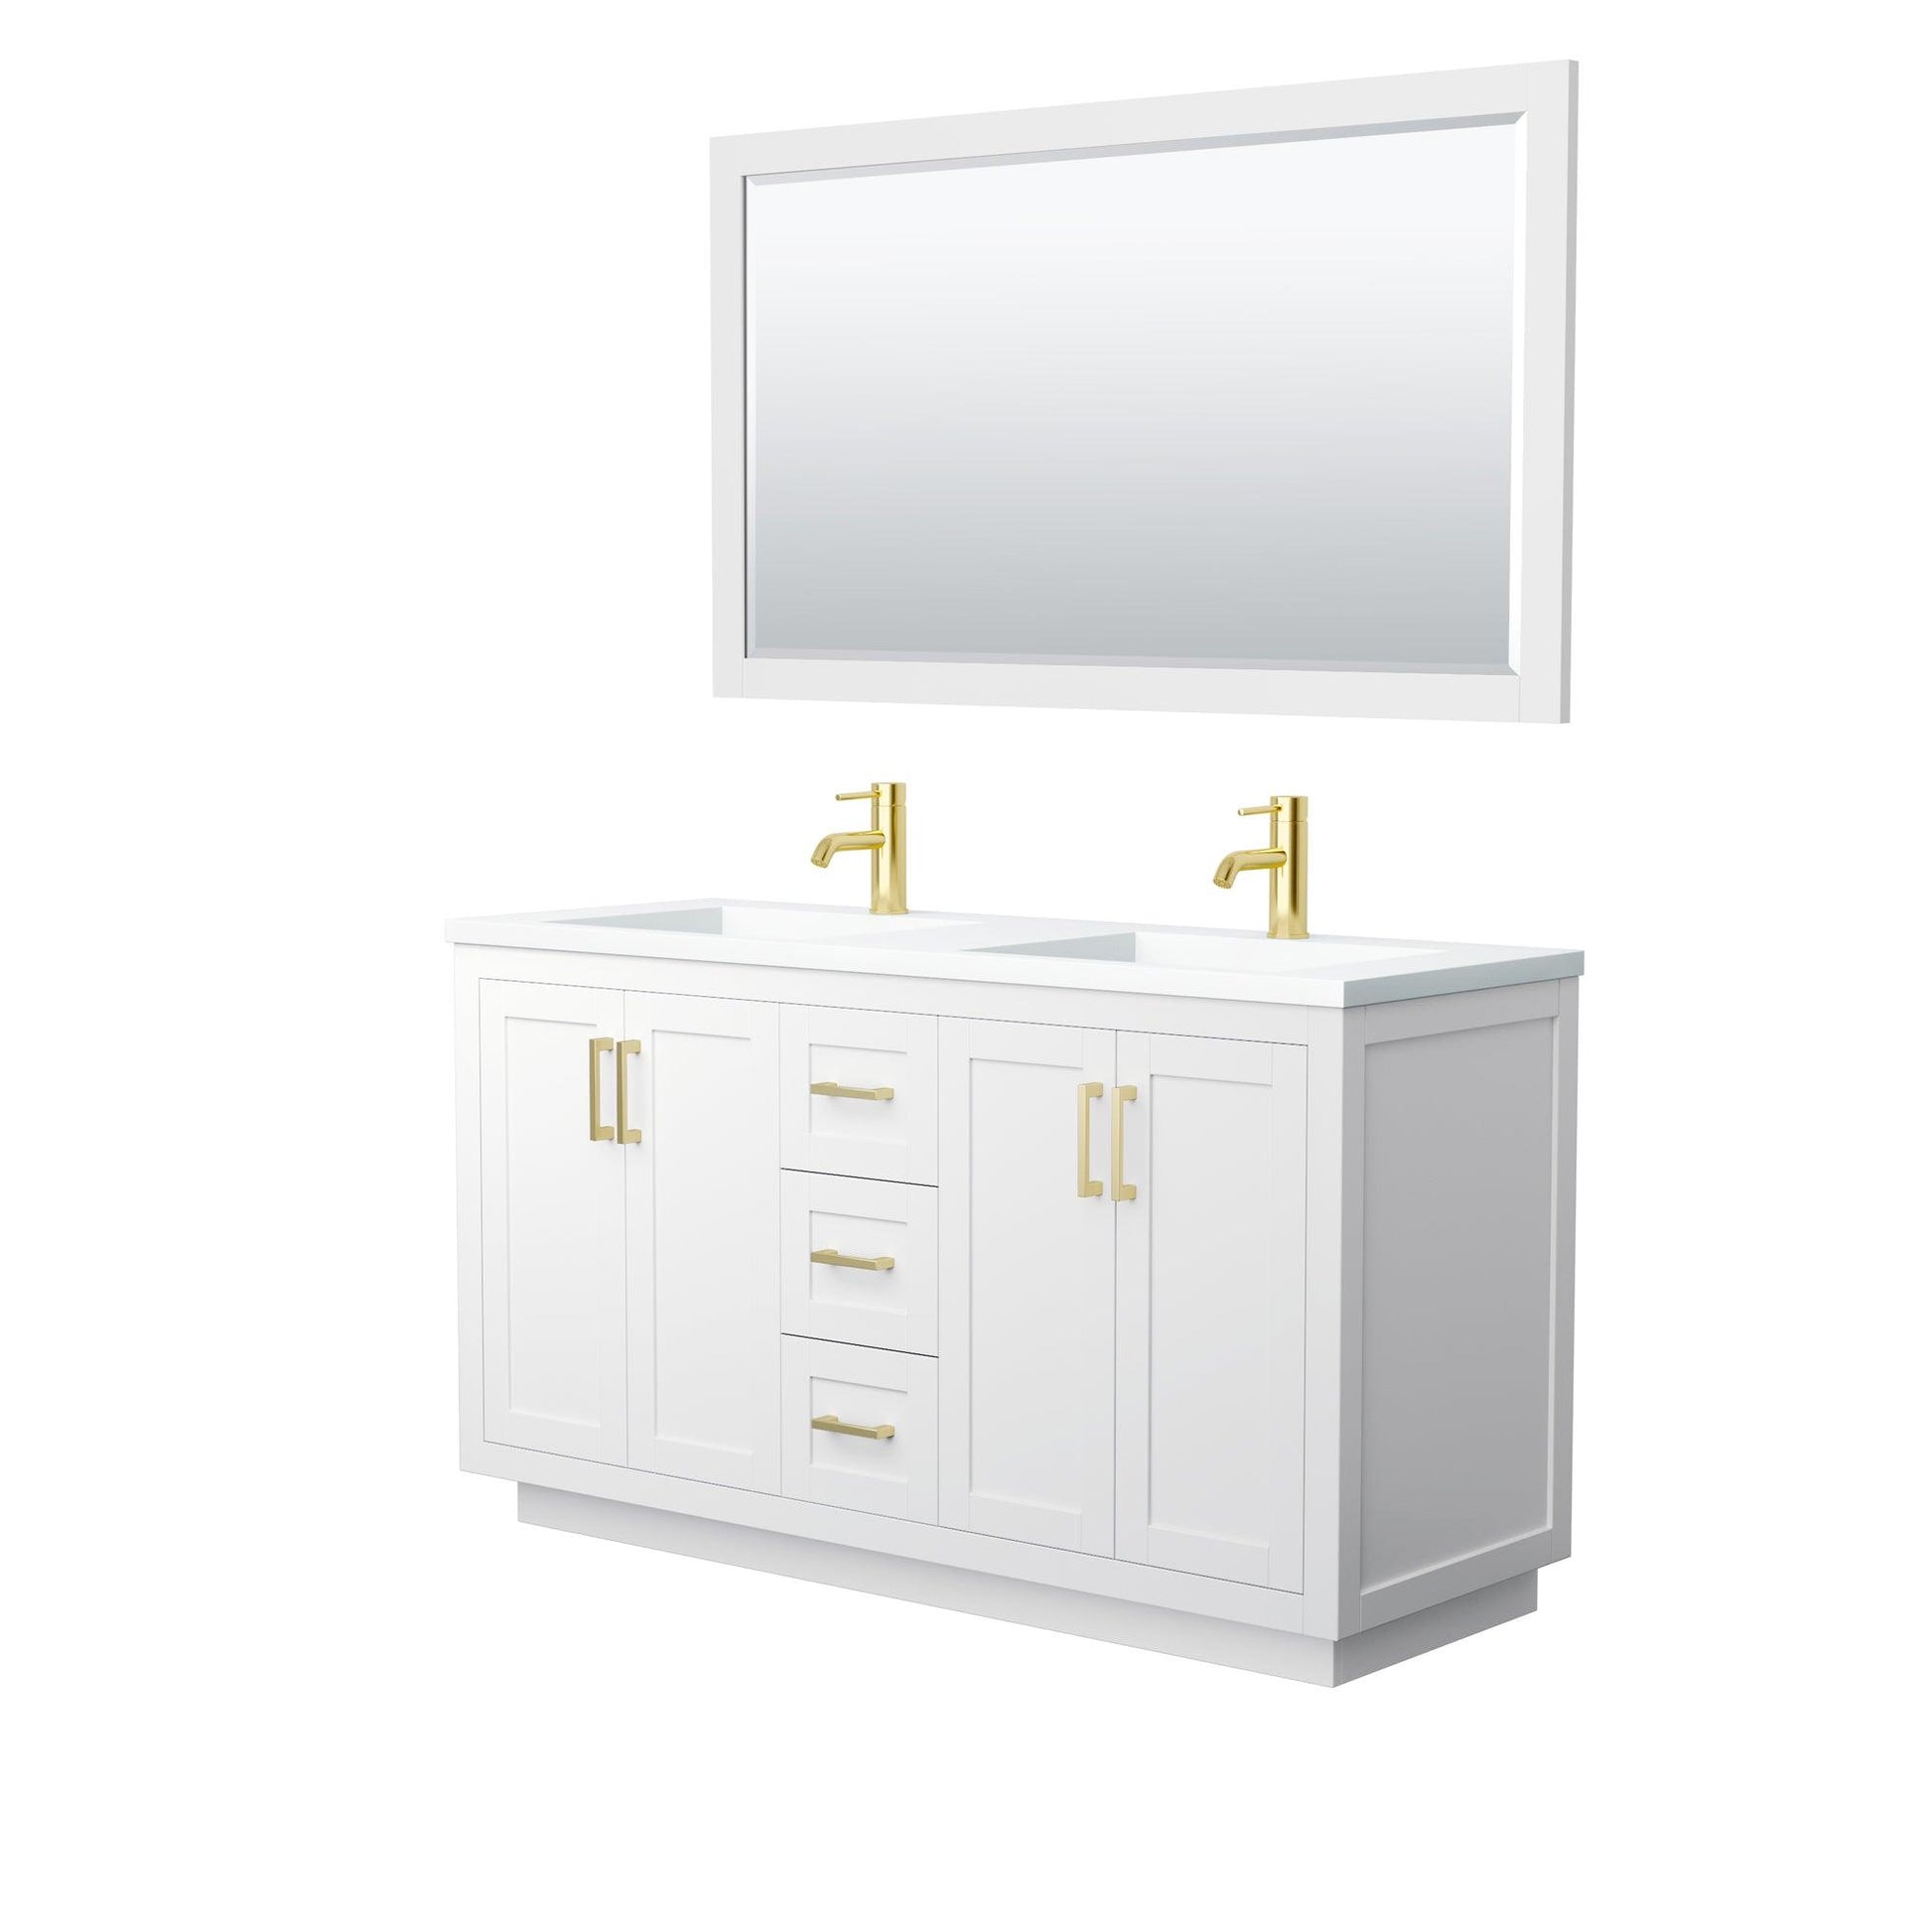 
  
  Wyndham Collection Miranda Double Bathroom Vanity in White, 1.25 Inch Thick Matte White Solid Surface Countertop, Integrated Sinks, Complementary Trim, Optional Mirror
  
